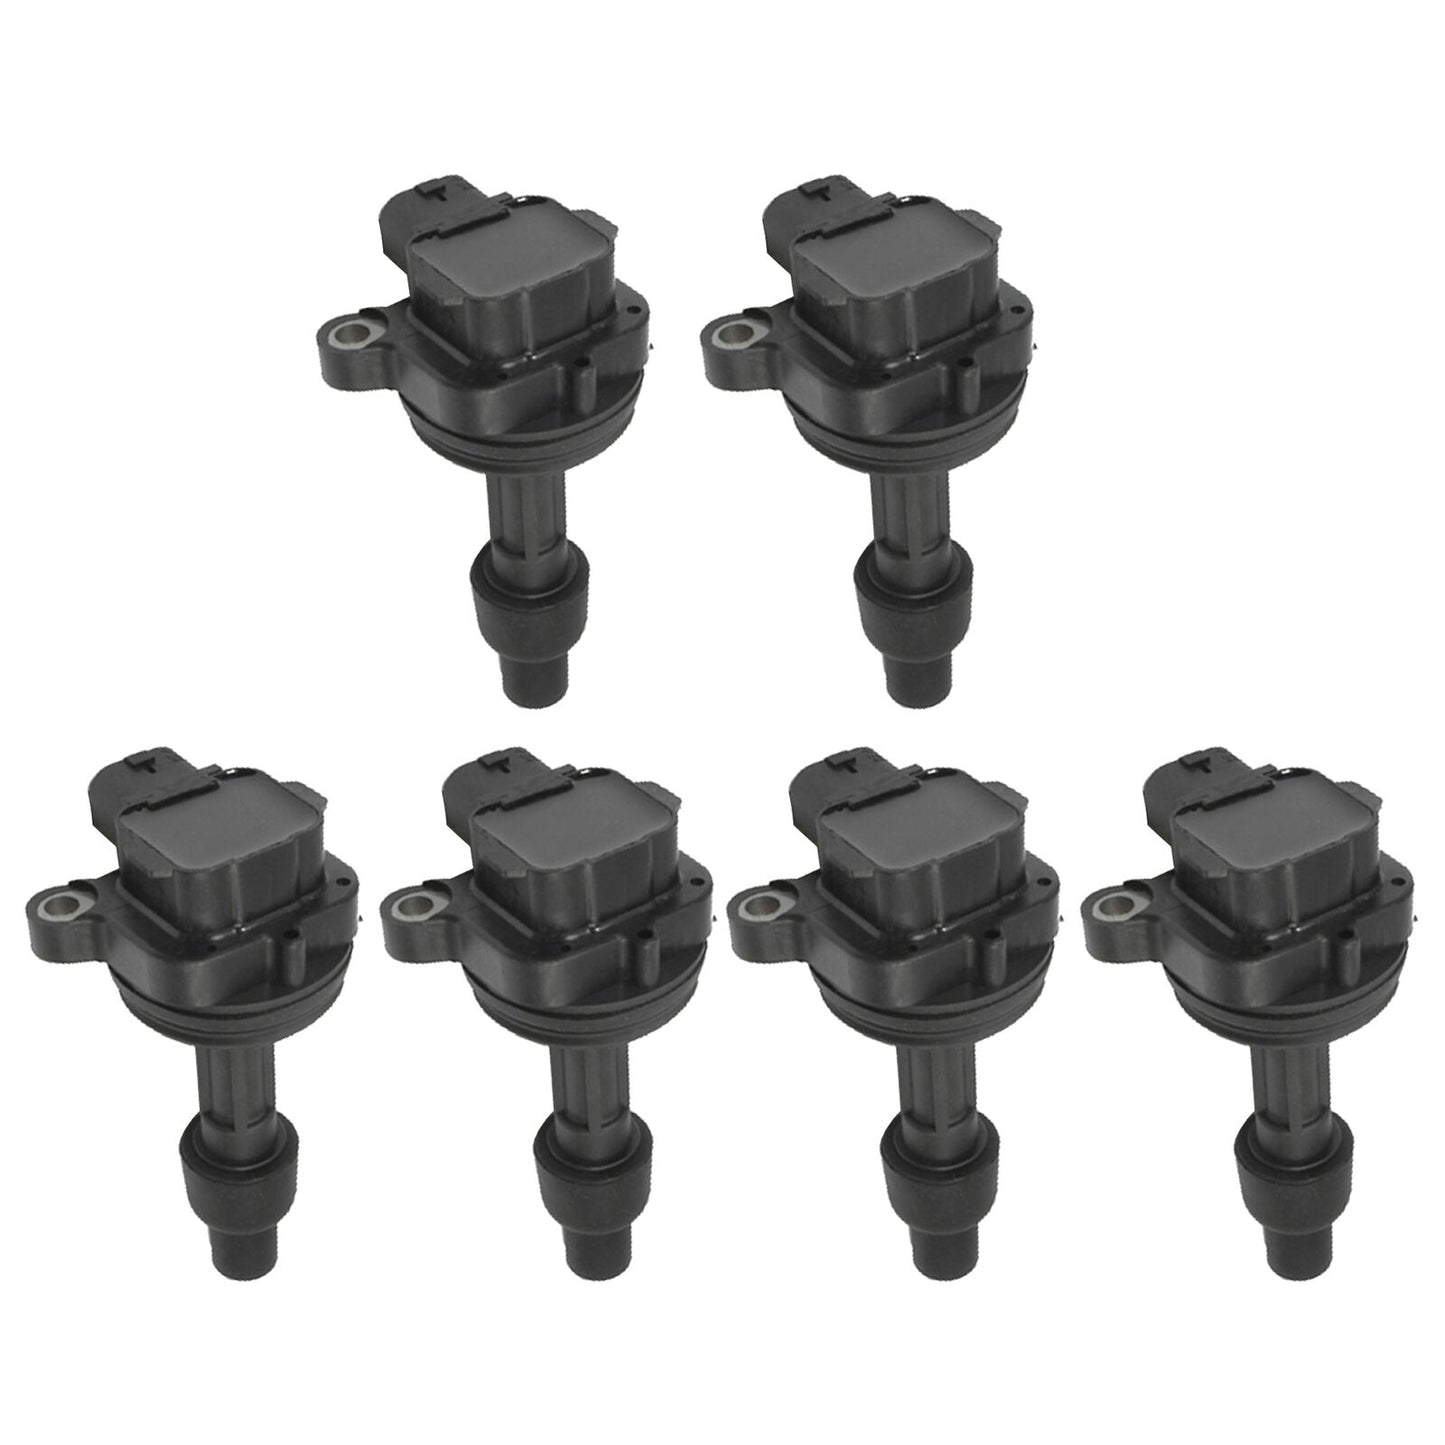 94-98 For Volvo 960 S90 V90 Ignition Coil B319*6 SET OF 6 IC115 1275971 *